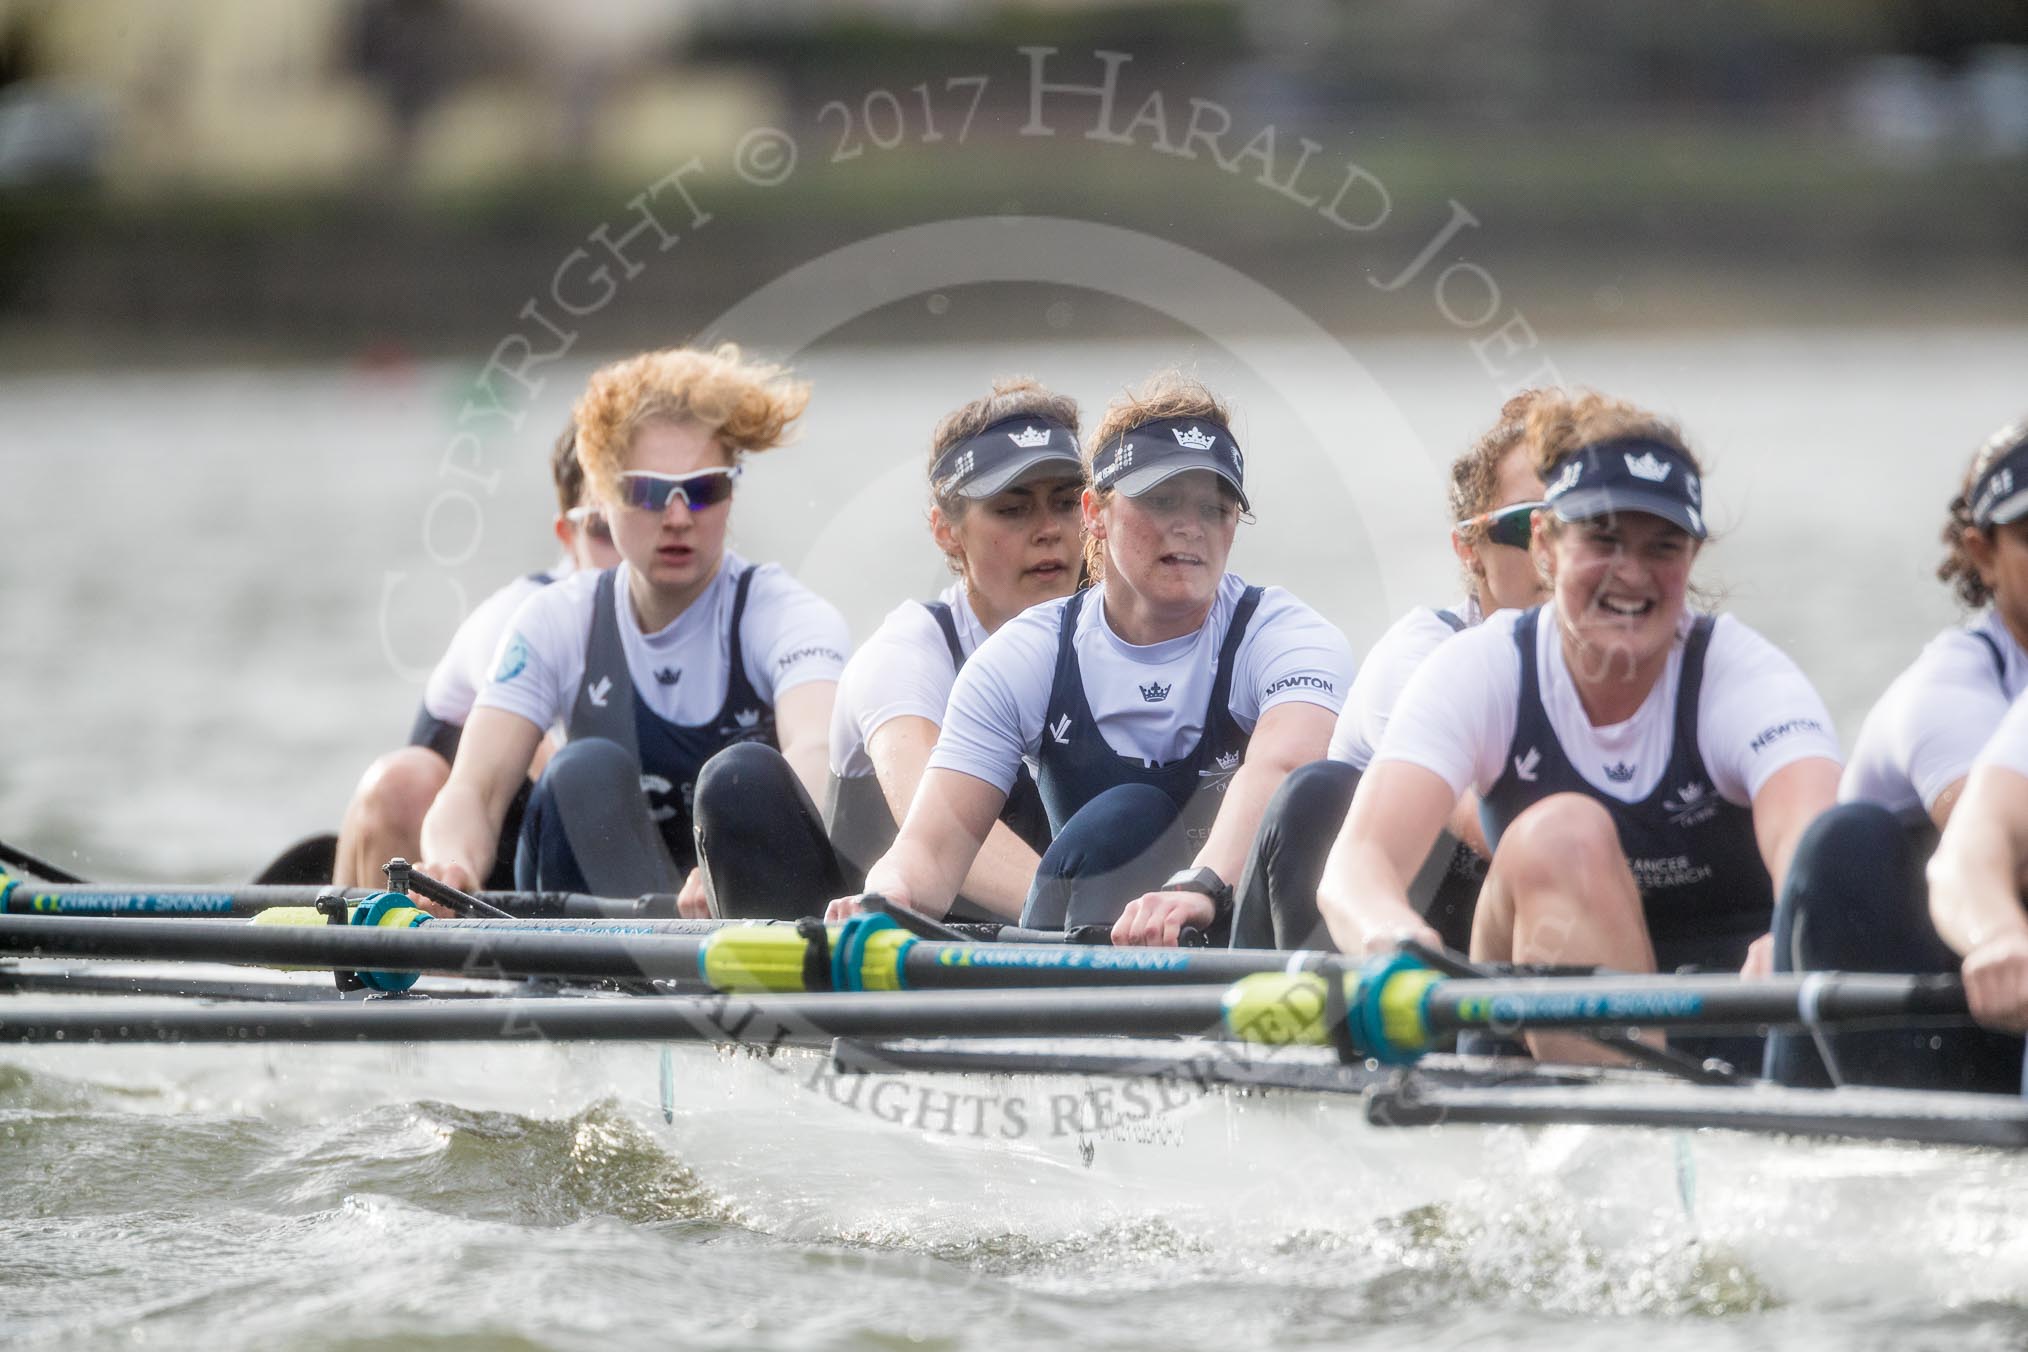 The Cancer Research UK Boat Race season 2017 - Women's Boat Race Fixture OUWBC vs Molesey BC: OUWBC approaching the finish line - bow Alice Roberts, 2 Beth Bridgman, 3 Rebecca Te Water Naude, 4 Rebecca Esselstein, 5 Chloe Laverack, 6 Harriet Austin, 7 Jenna Hebert, stroke Emily Cameron.
River Thames between Putney Bridge and Mortlake,
London SW15,

United Kingdom,
on 19 March 2017 at 16:24, image #149